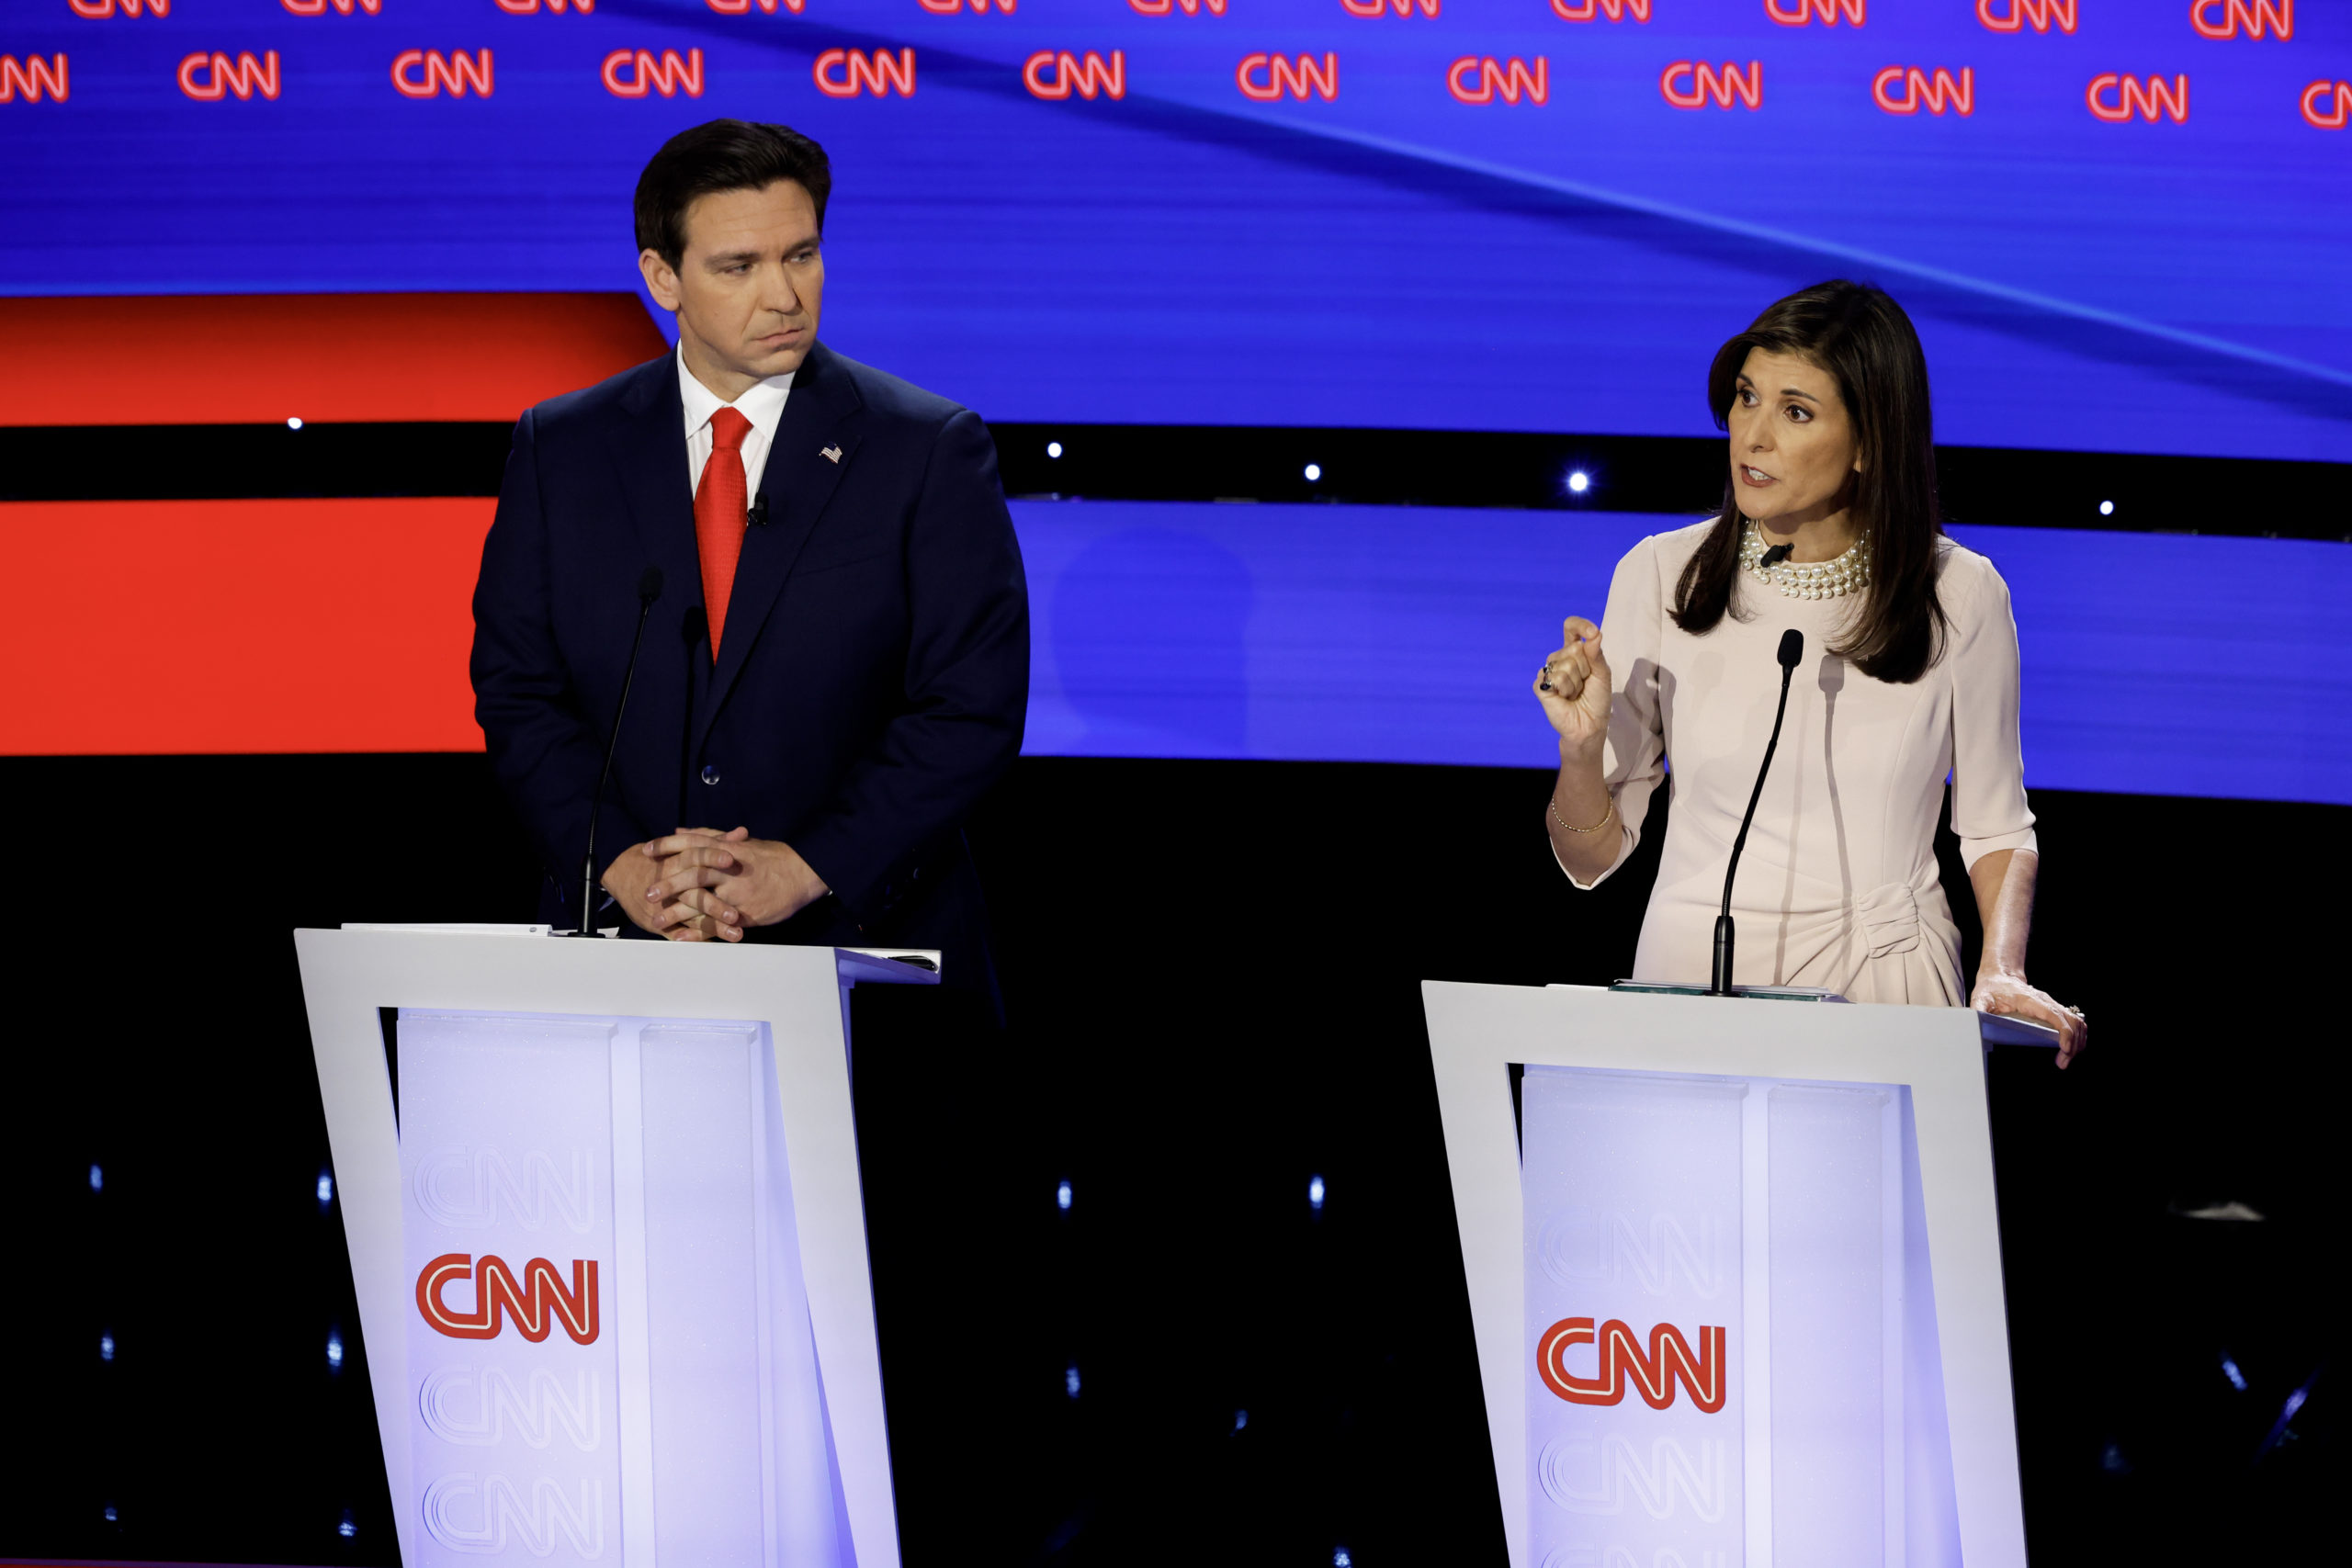 DES MOINES, IOWA - JANUARY 10: Republican presidential candidates Florida Gov. Ron DeSantis and former U.N. Ambassador Nikki Haley participate in the CNN Republican Presidential Primary Debate in Sheslow Auditorium at Drake University on January 10, 2024 in Des Moines, Iowa. DeSantis and Haley both qualified for this final debate before the Iowa caucuses, while former President Donald Trump declined to participate and instead held a simultaneous town hall event live on FOX News. (Photo by Chip Somodevilla/Getty Images)